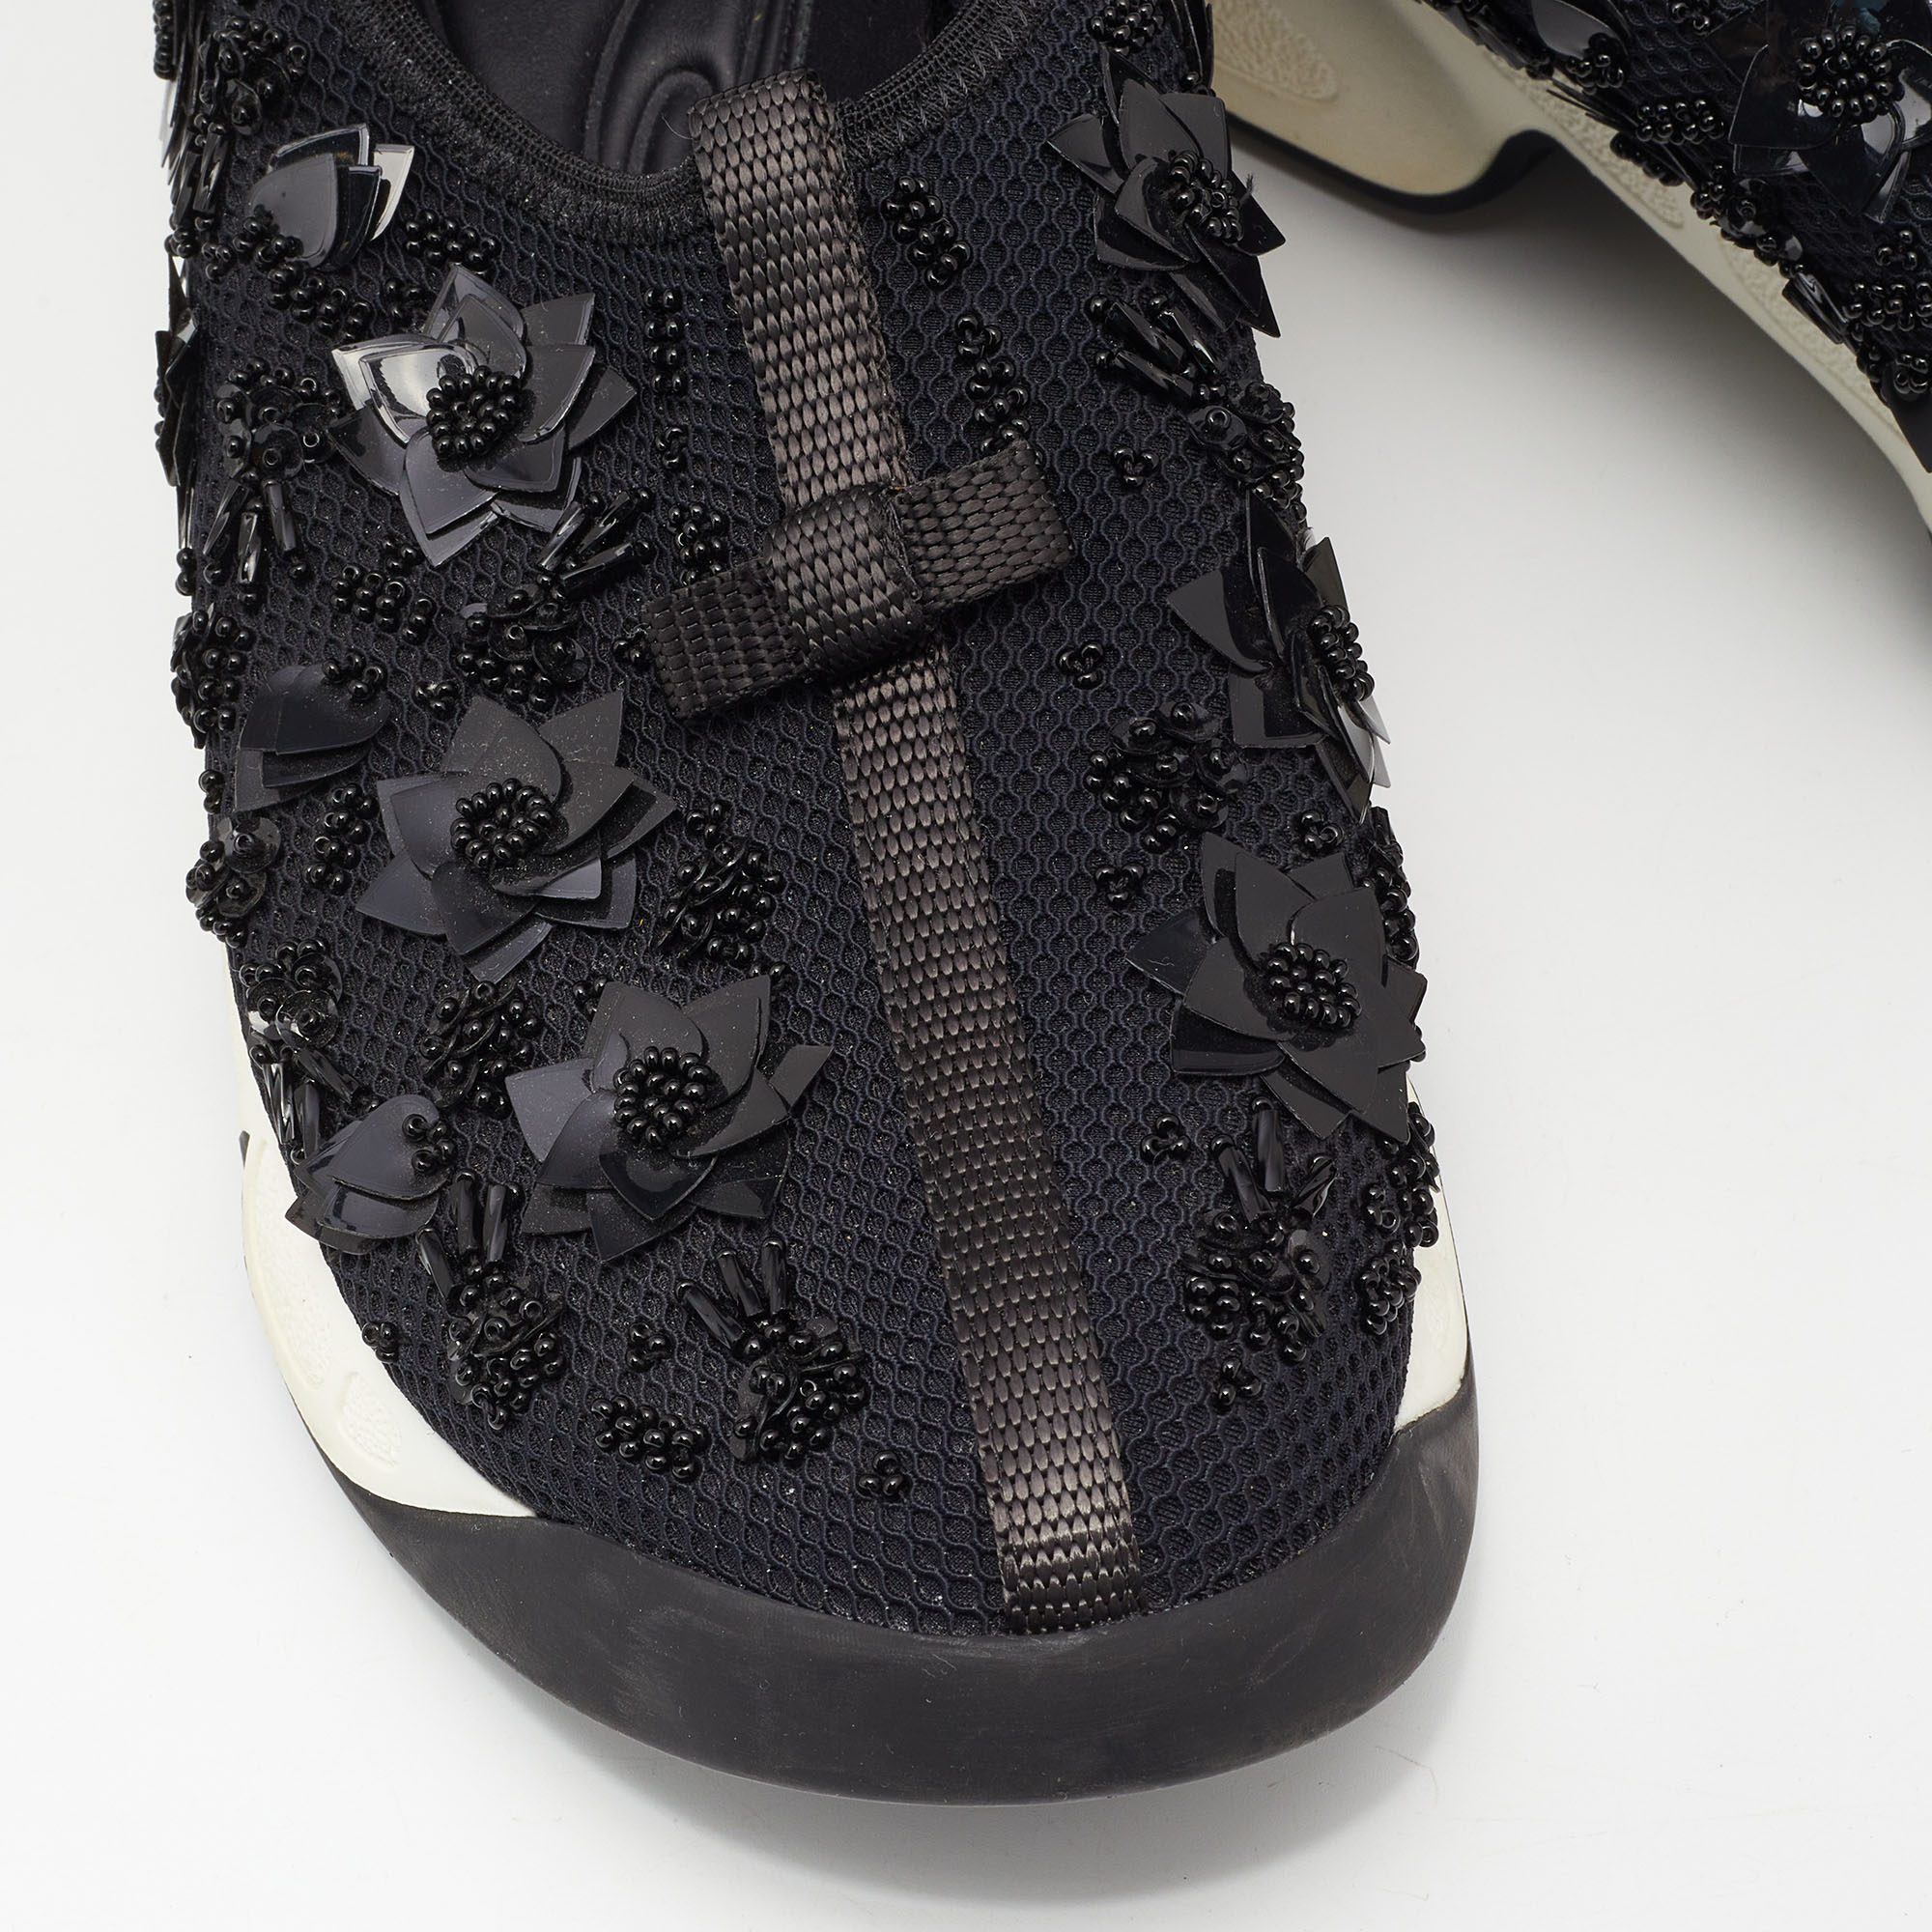 Dior Black Crystal Embellished Mesh Fusion Low-Top Sneakers Size 38.5